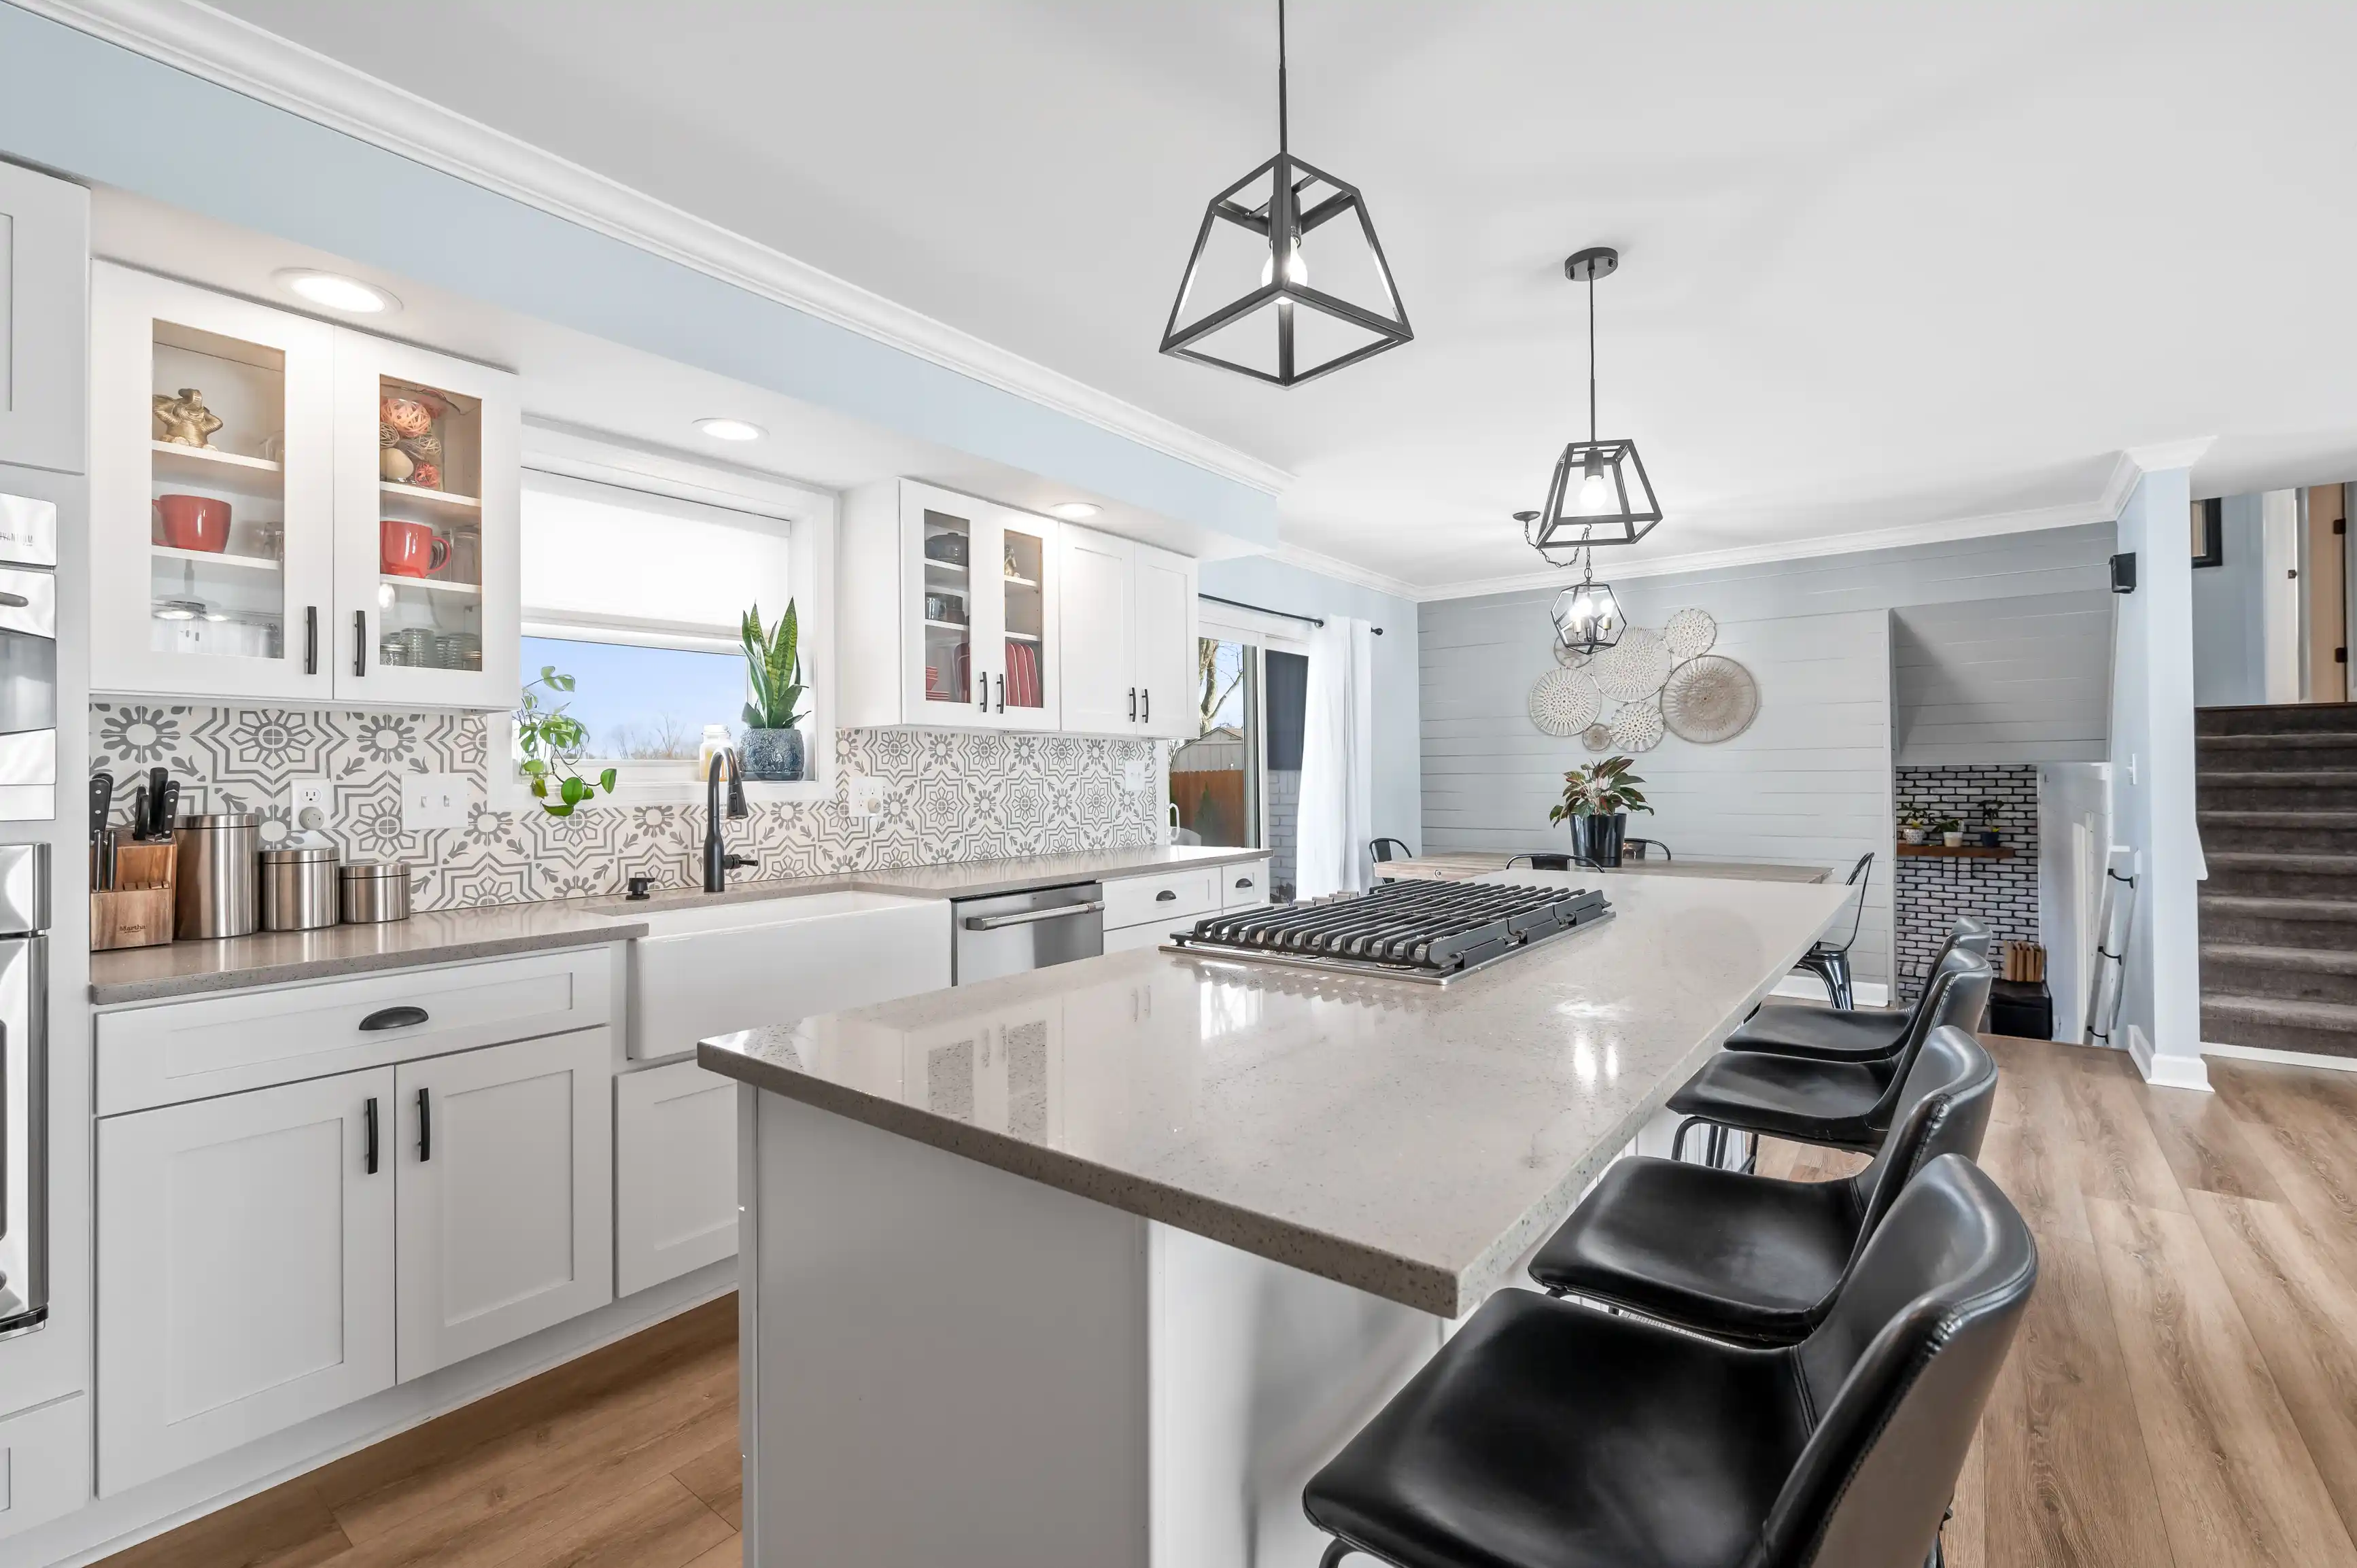 Modern kitchen interior with white cabinets, patterned backsplash, central island with black stools, pendant lights, and a view to a dining area.